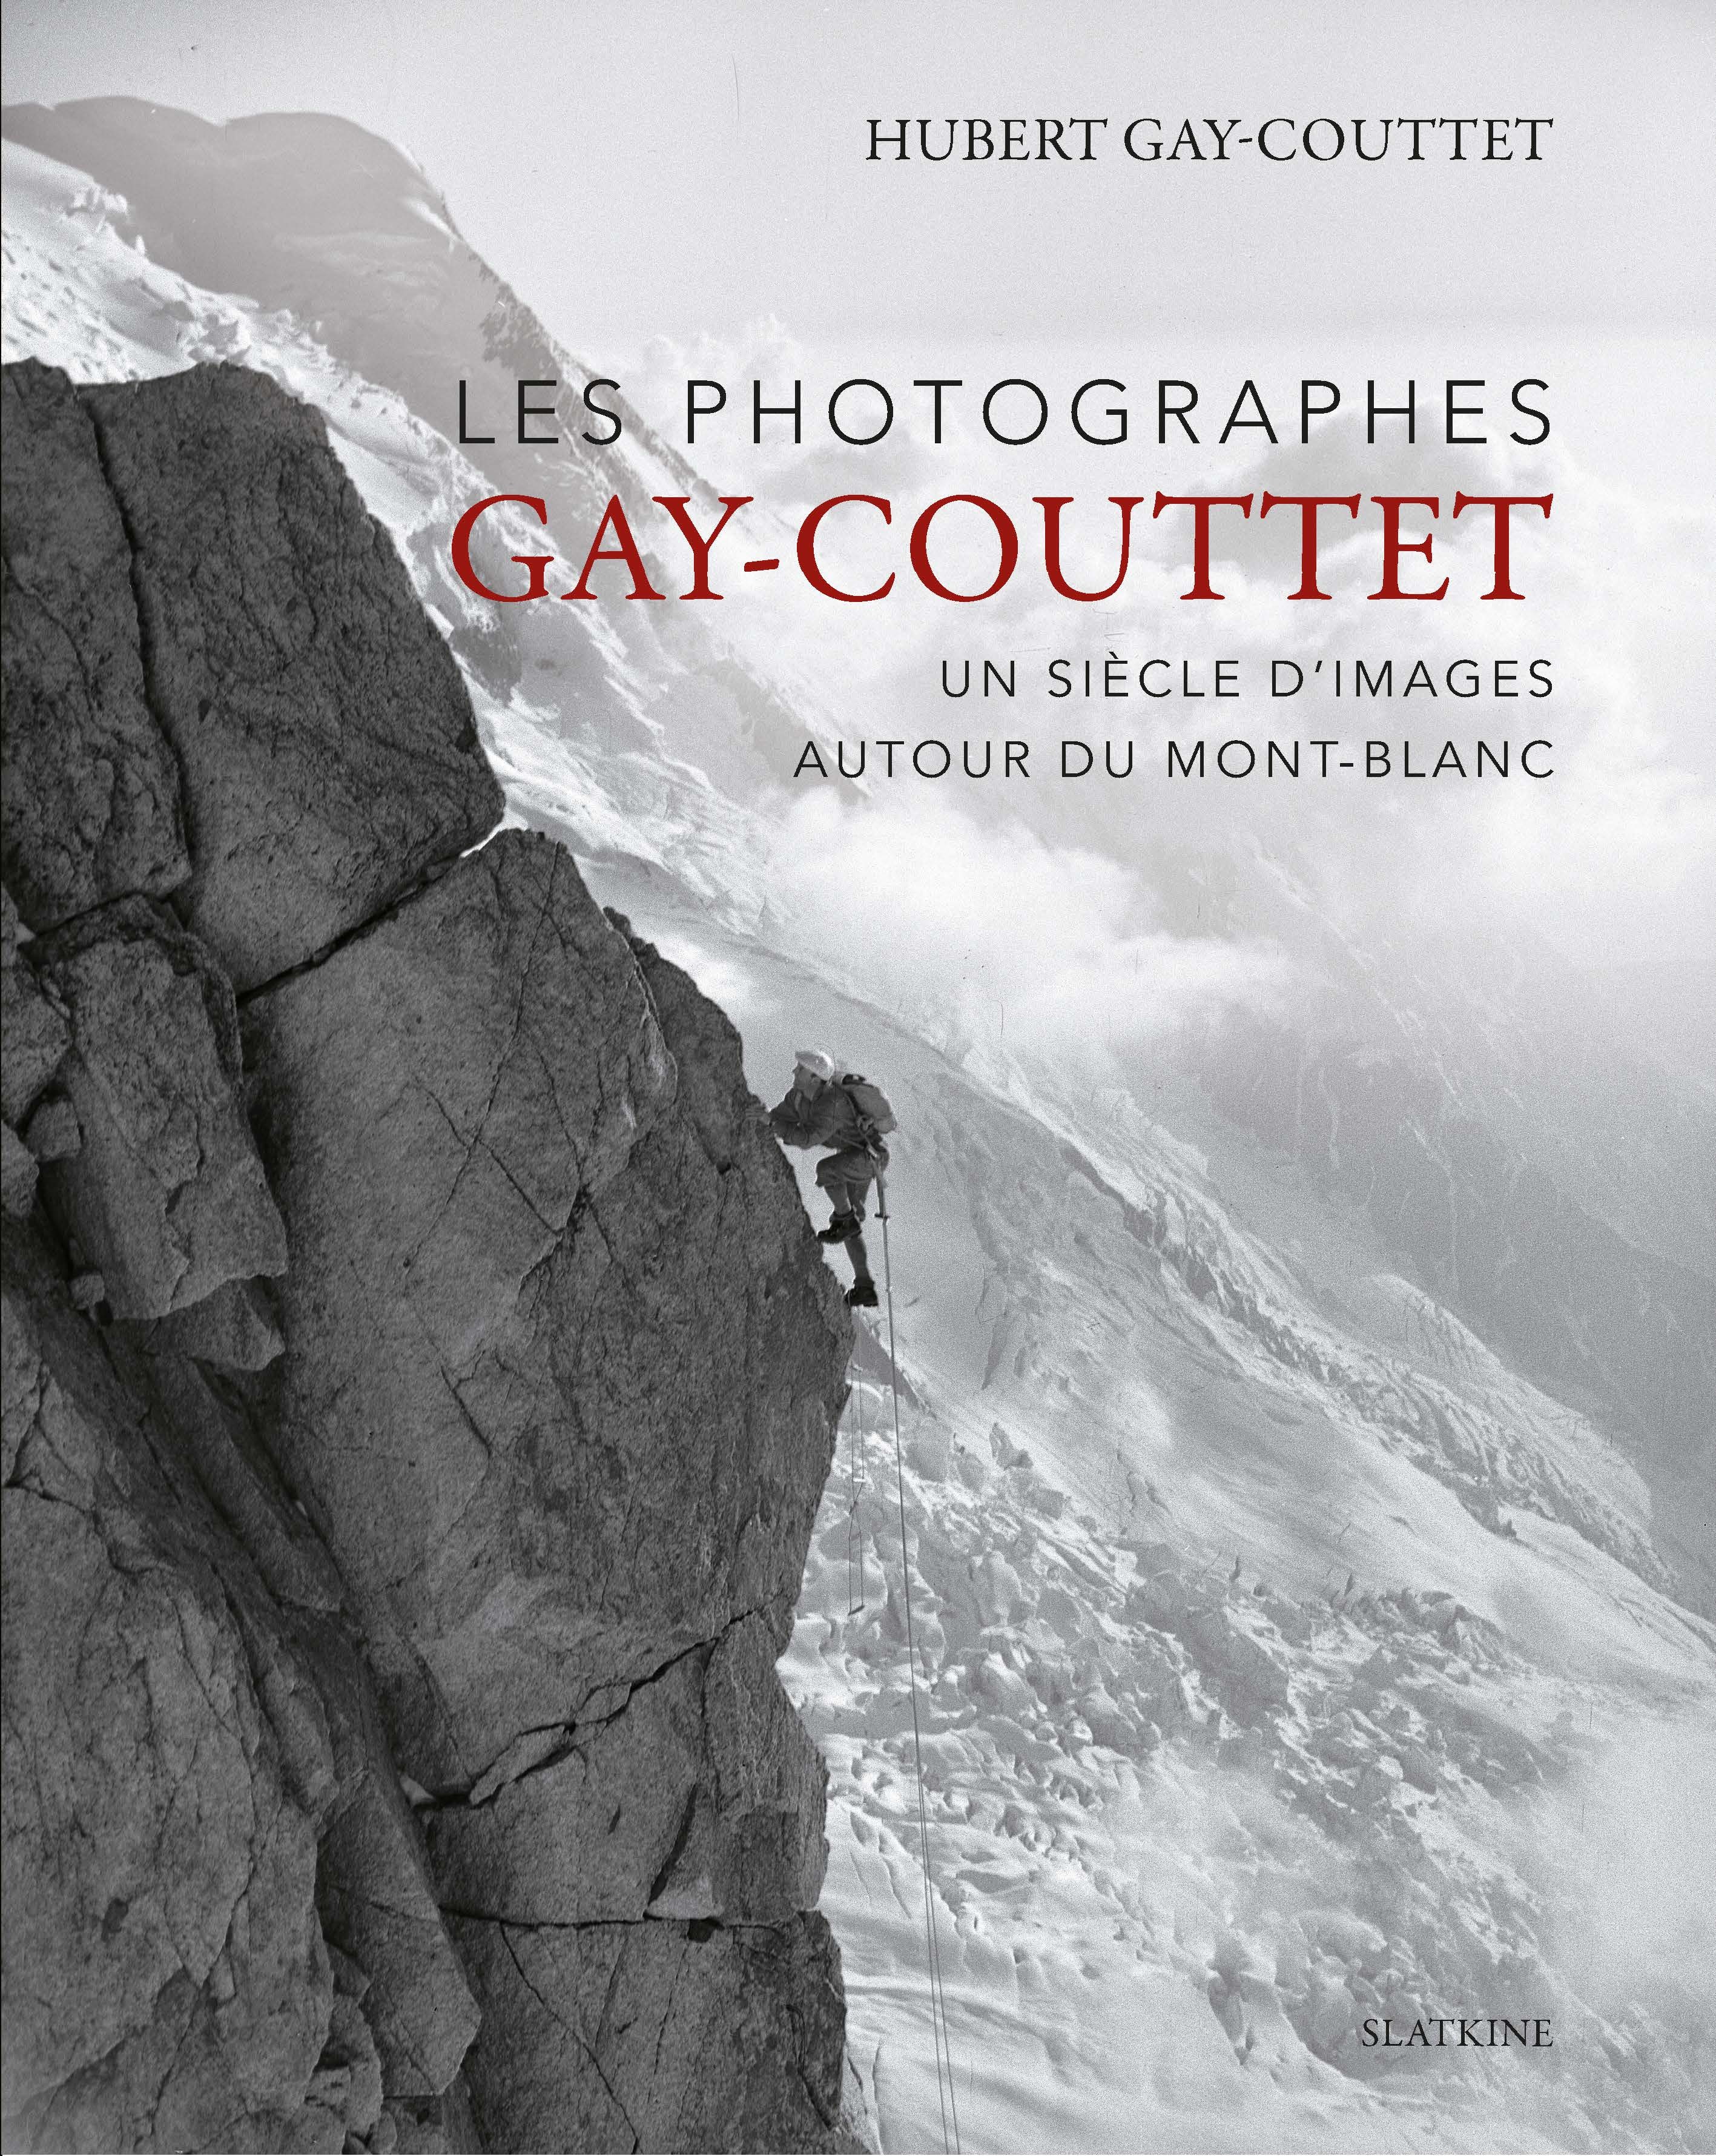 Gay-Coutett Mont-Blanc